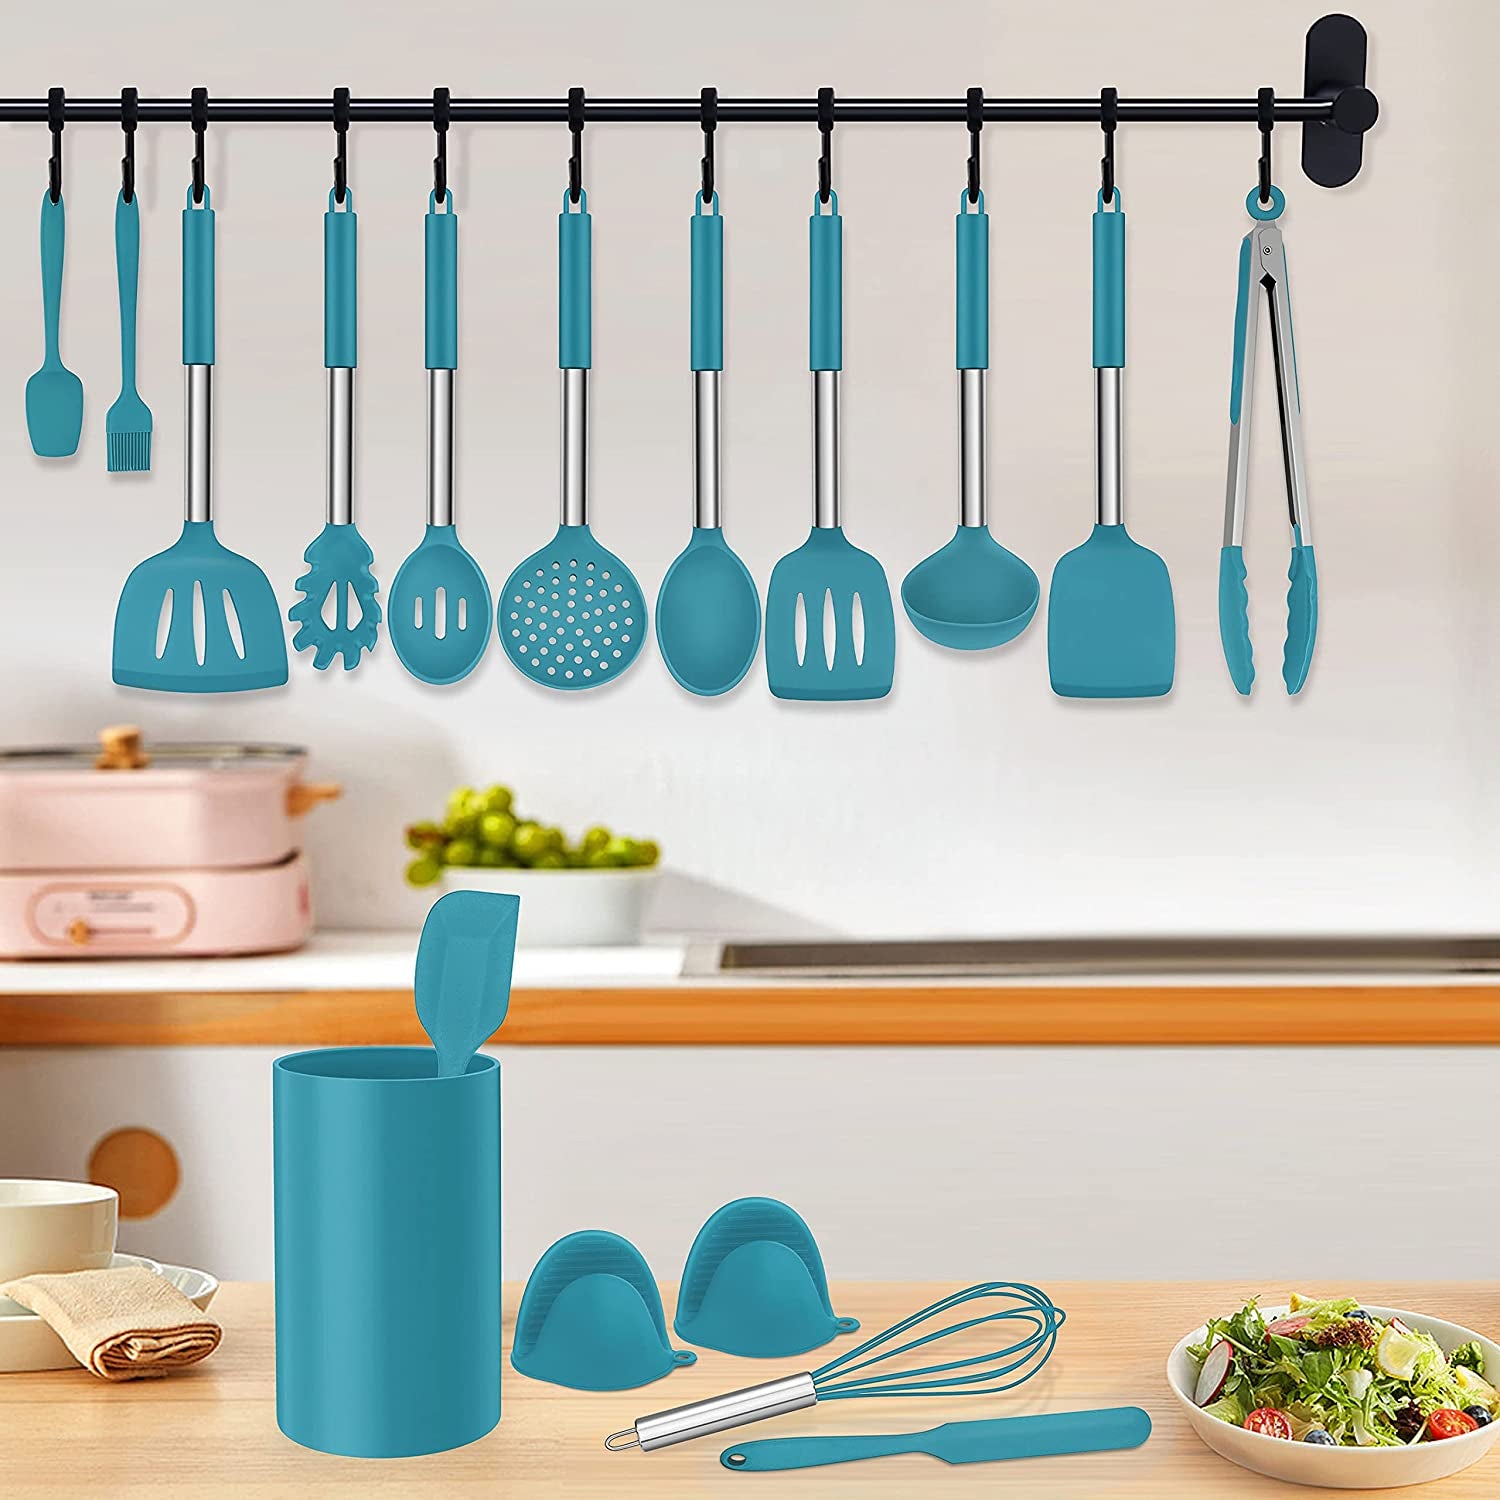 27 Pieces Silicone Cooking Utensils Set with Holder